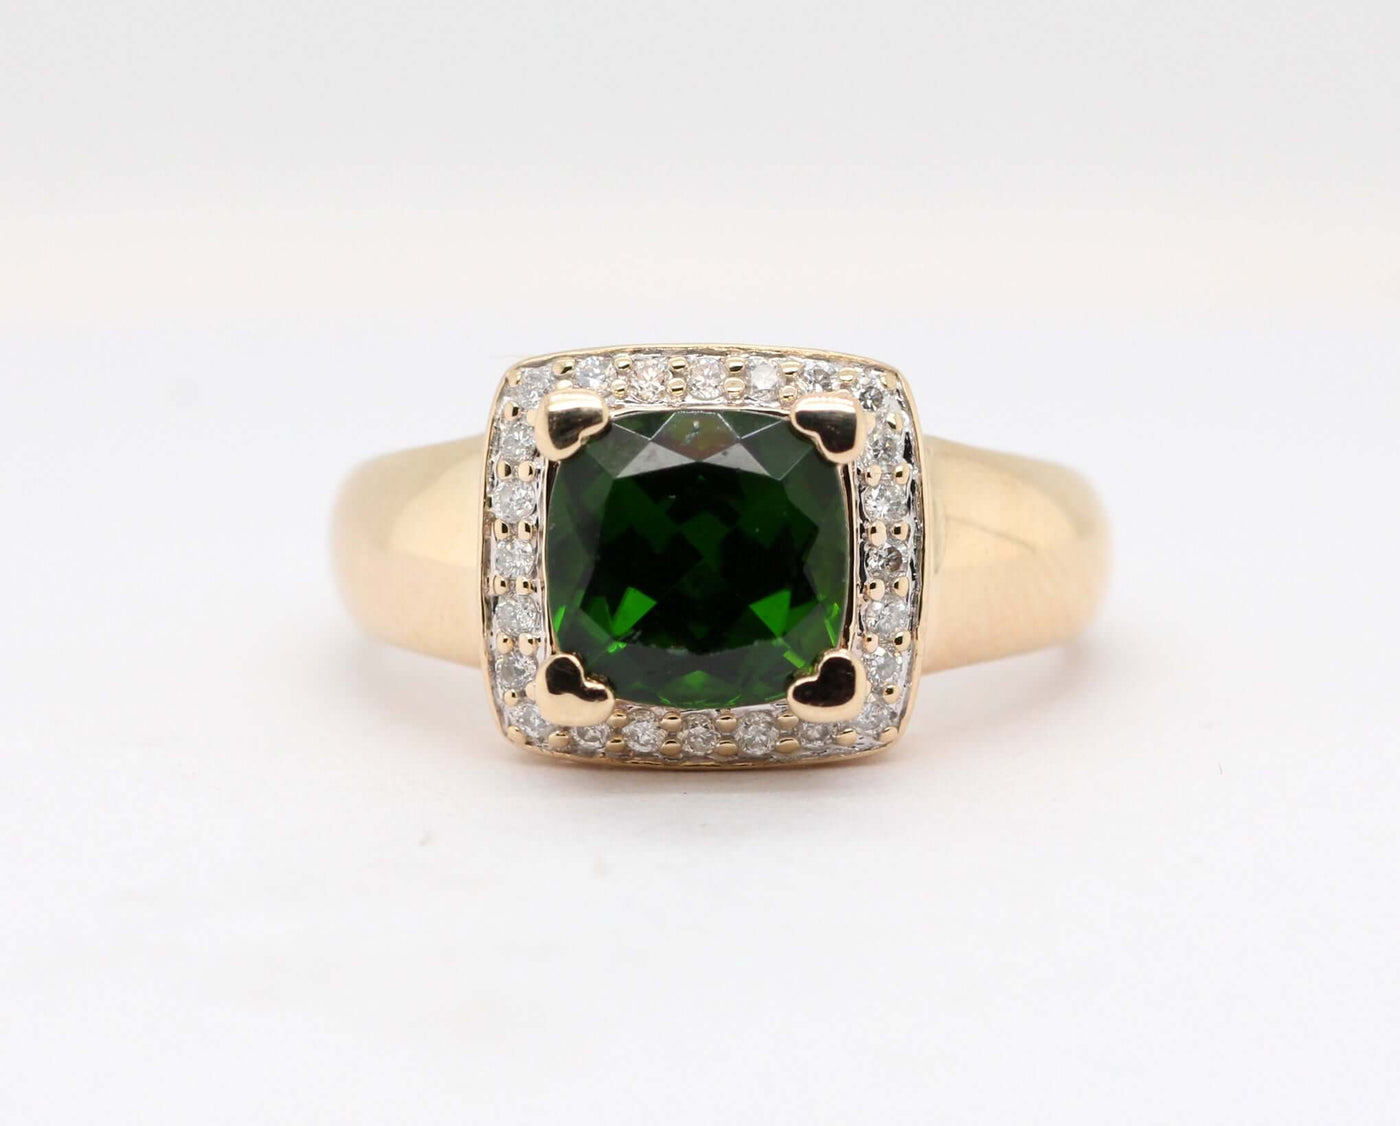 14KY 2.05 CTTW GREEN TOURMALINE AND DIAMOND RING, .20 CTTW G-I1